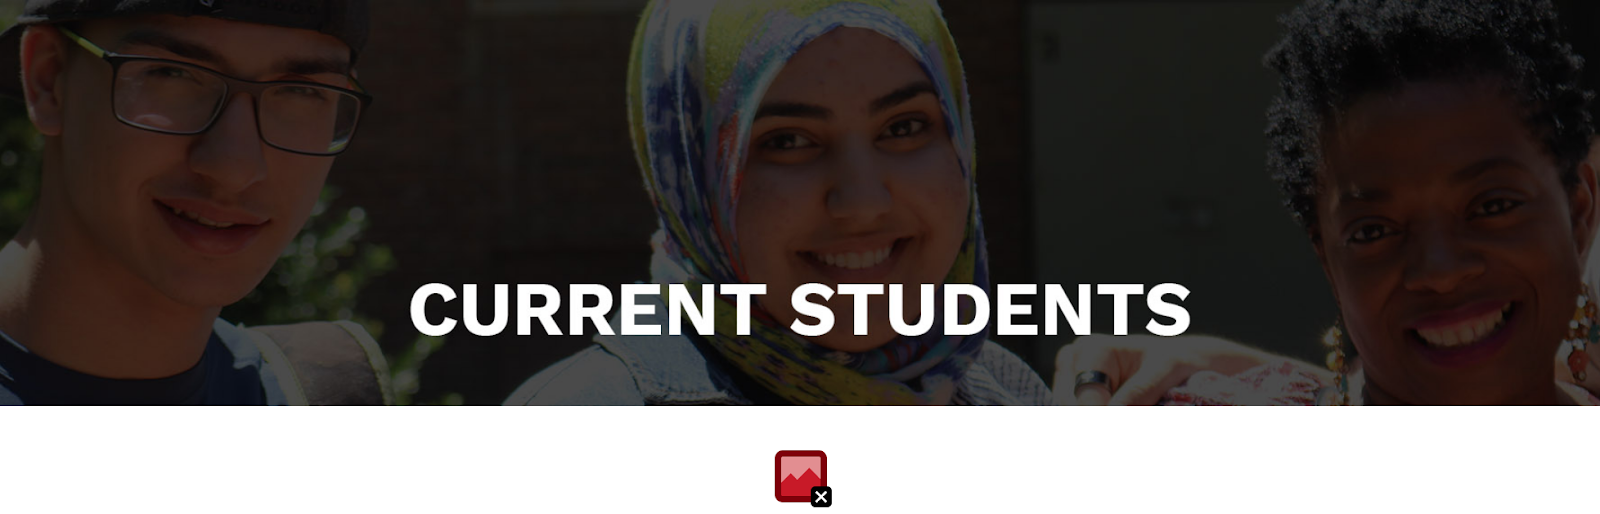 Current Students university example banner with smiling students with WAVE icon